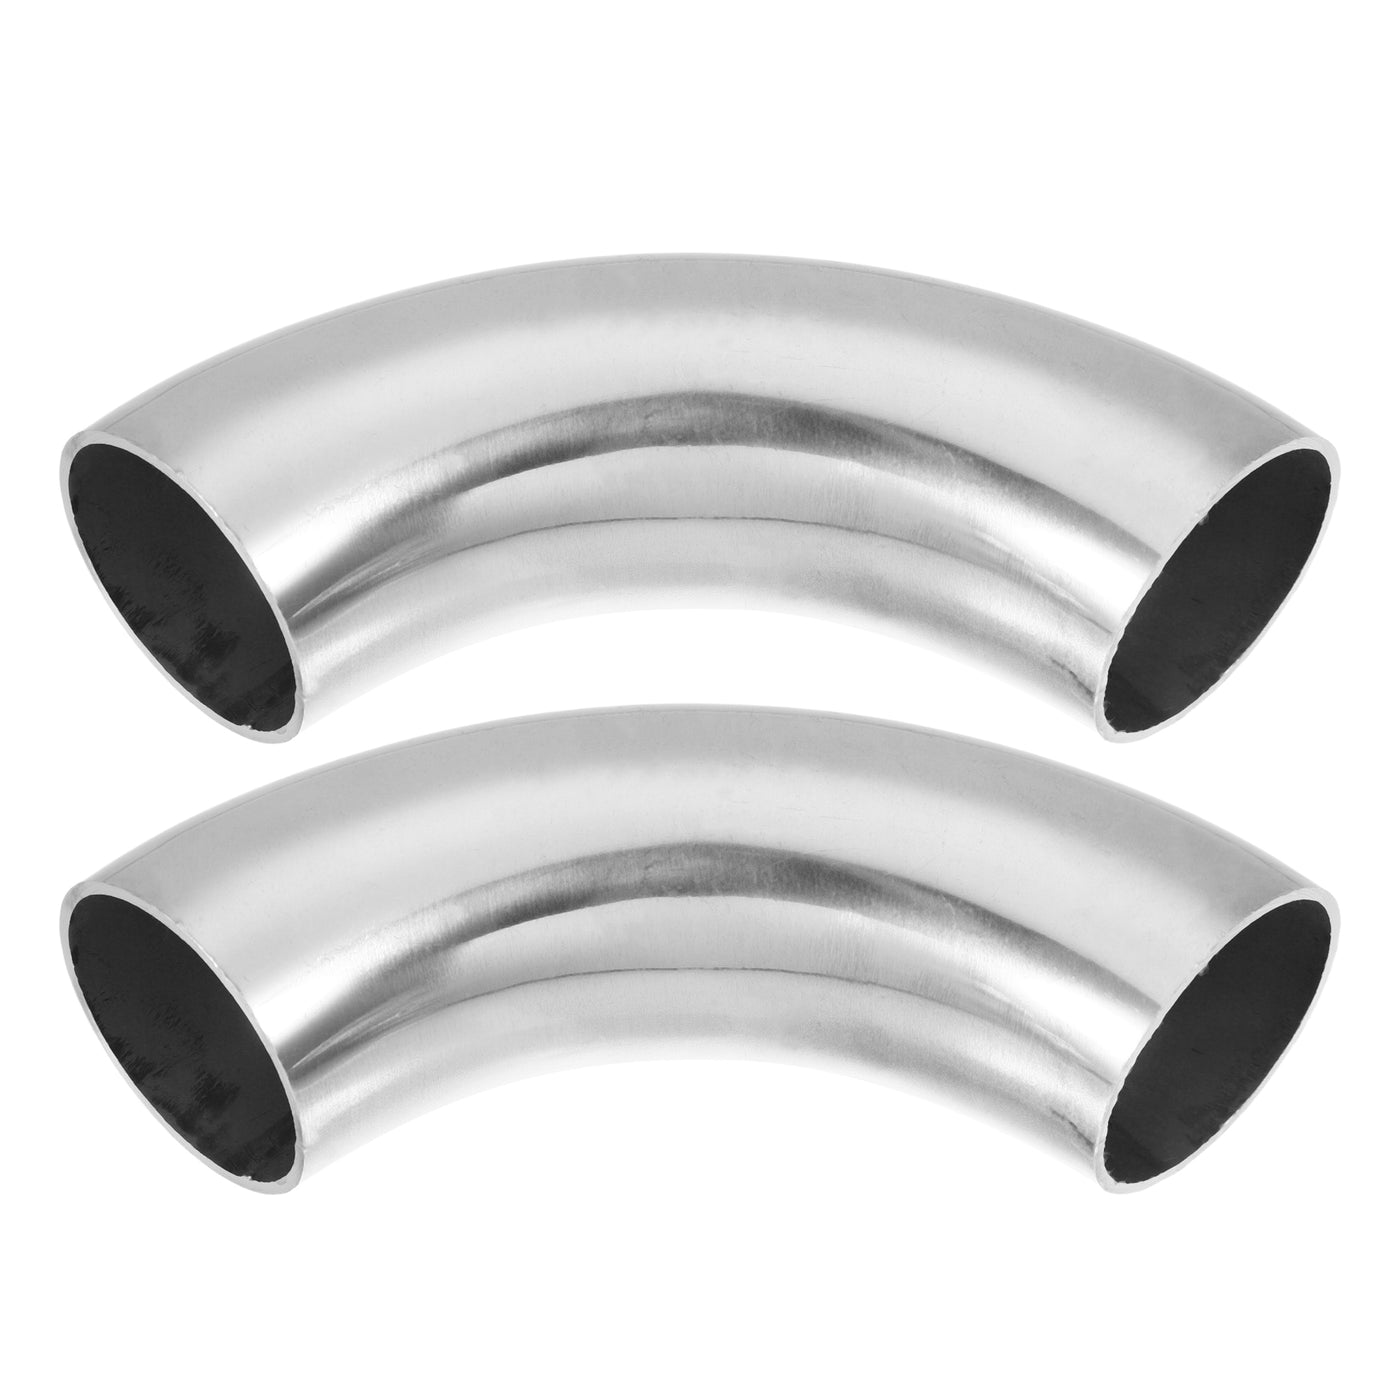 uxcell Uxcell 2pcs 90 Degree SS304 Stainless Steel Bend Tube Exhaust Elbow Pipe for Car Modified Exhaust System 0.06" Wall Thickness Piping Silver Tone